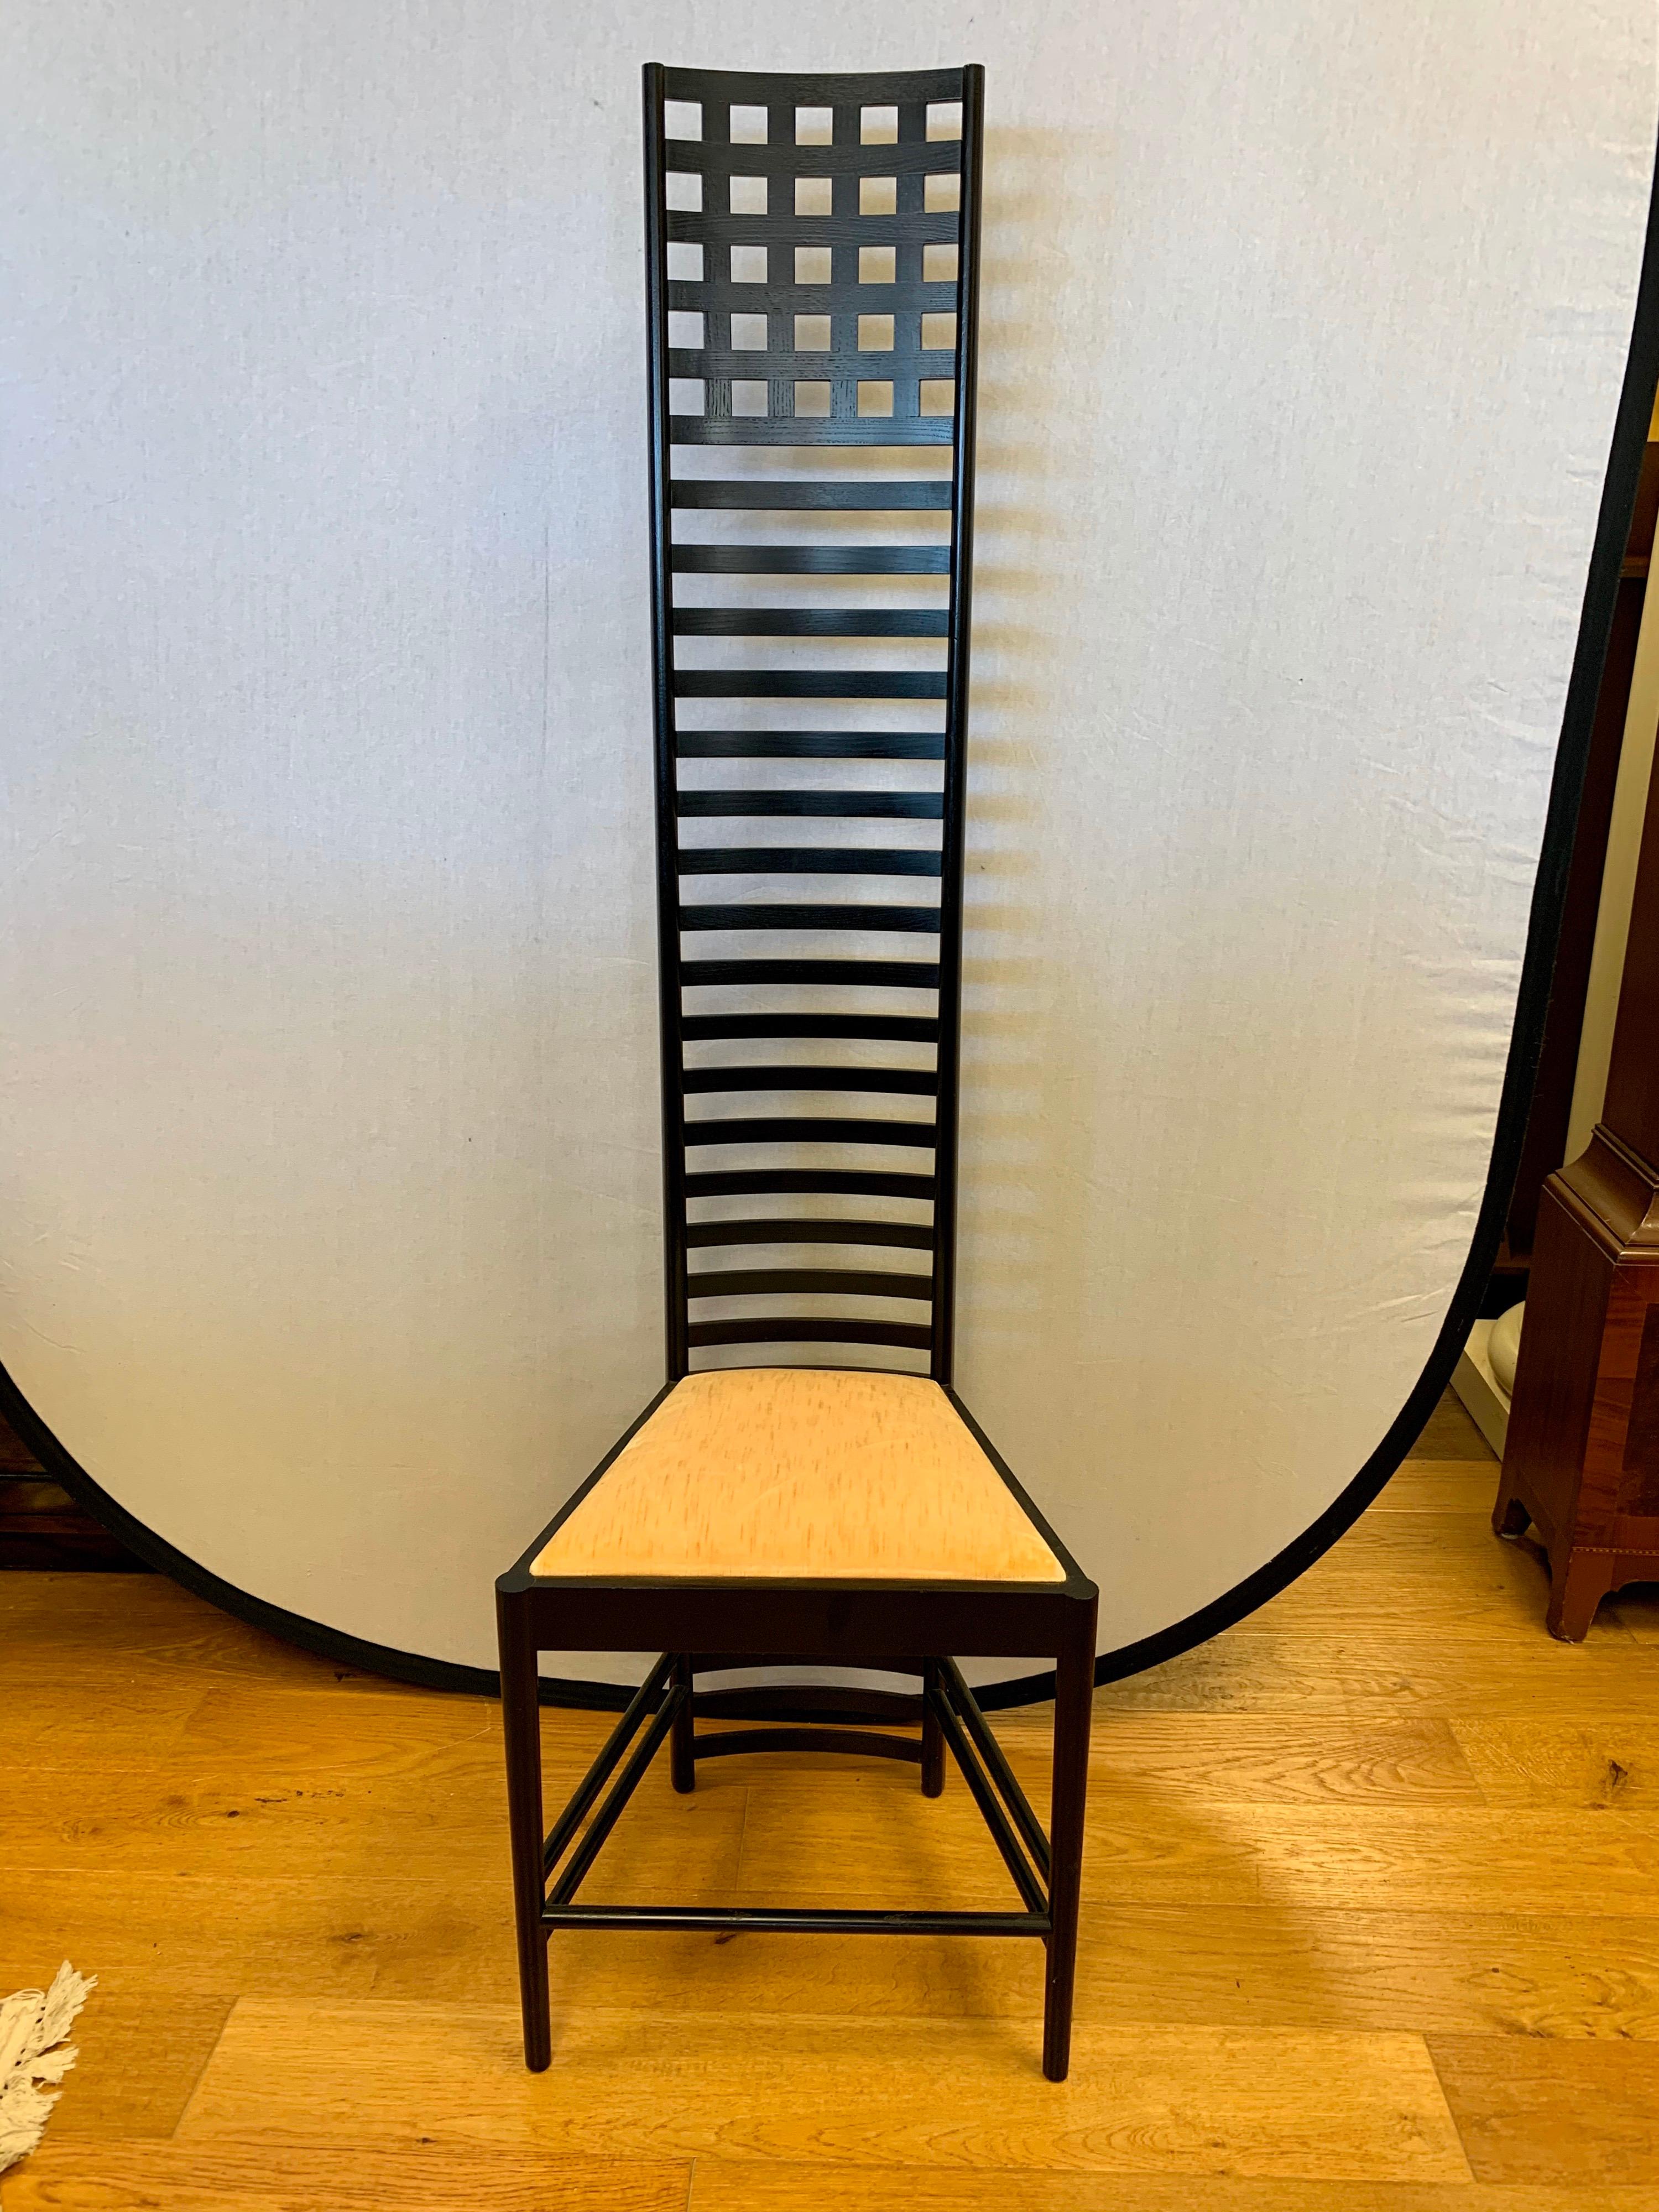 Elegant signed Cassina Charles Rennie Mackintosh Hill House chair. This tall ladder back chair has become a design classic over the years. . The frame is made out of black stained ash wood and the seat cushion is a peach velvet.
All manufacturer